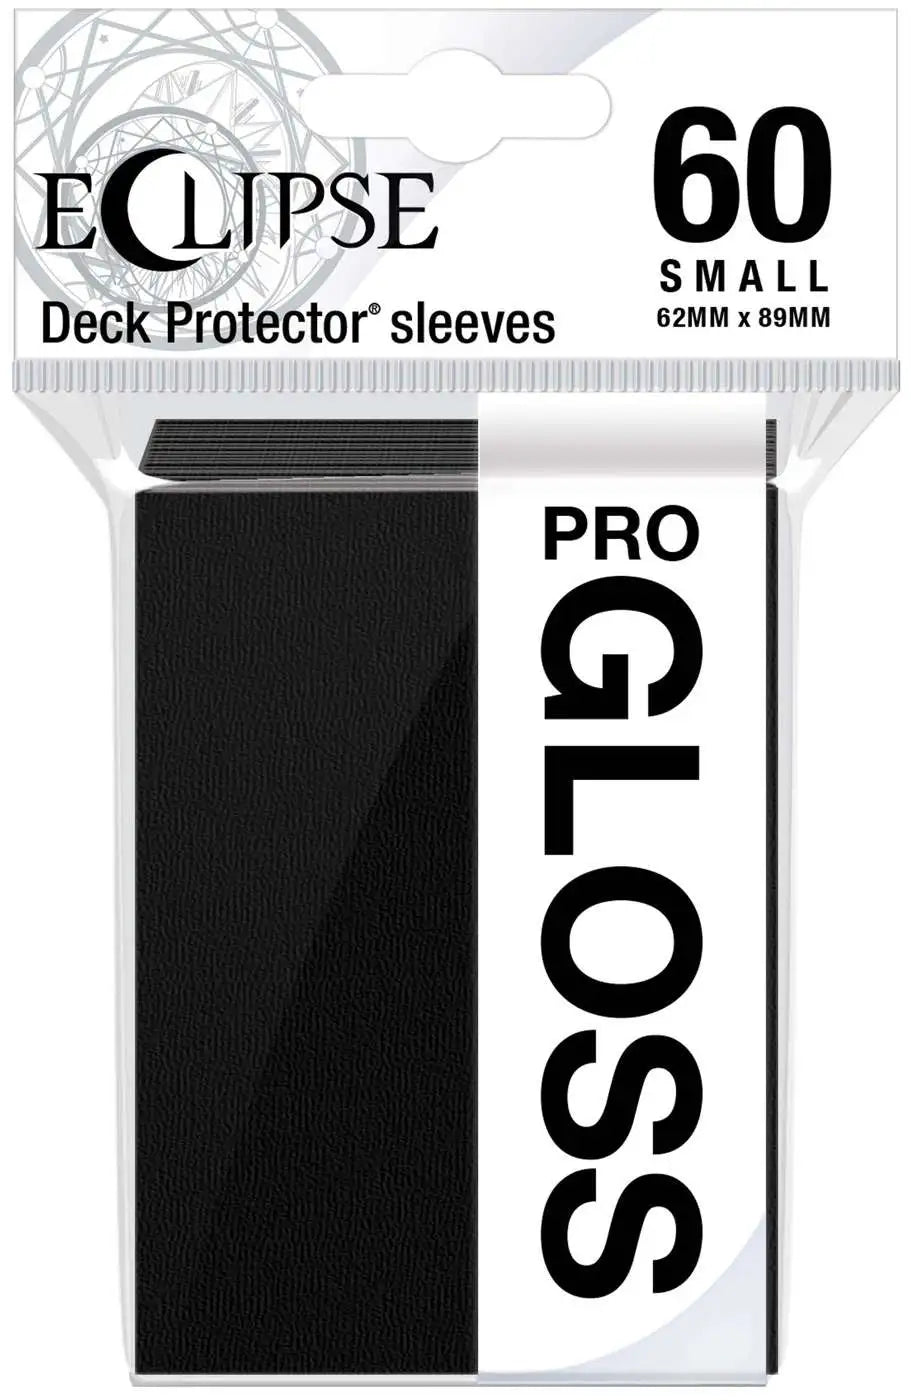 Ultra Pro Eclipse Gloss Small Size 60ct Sleeves